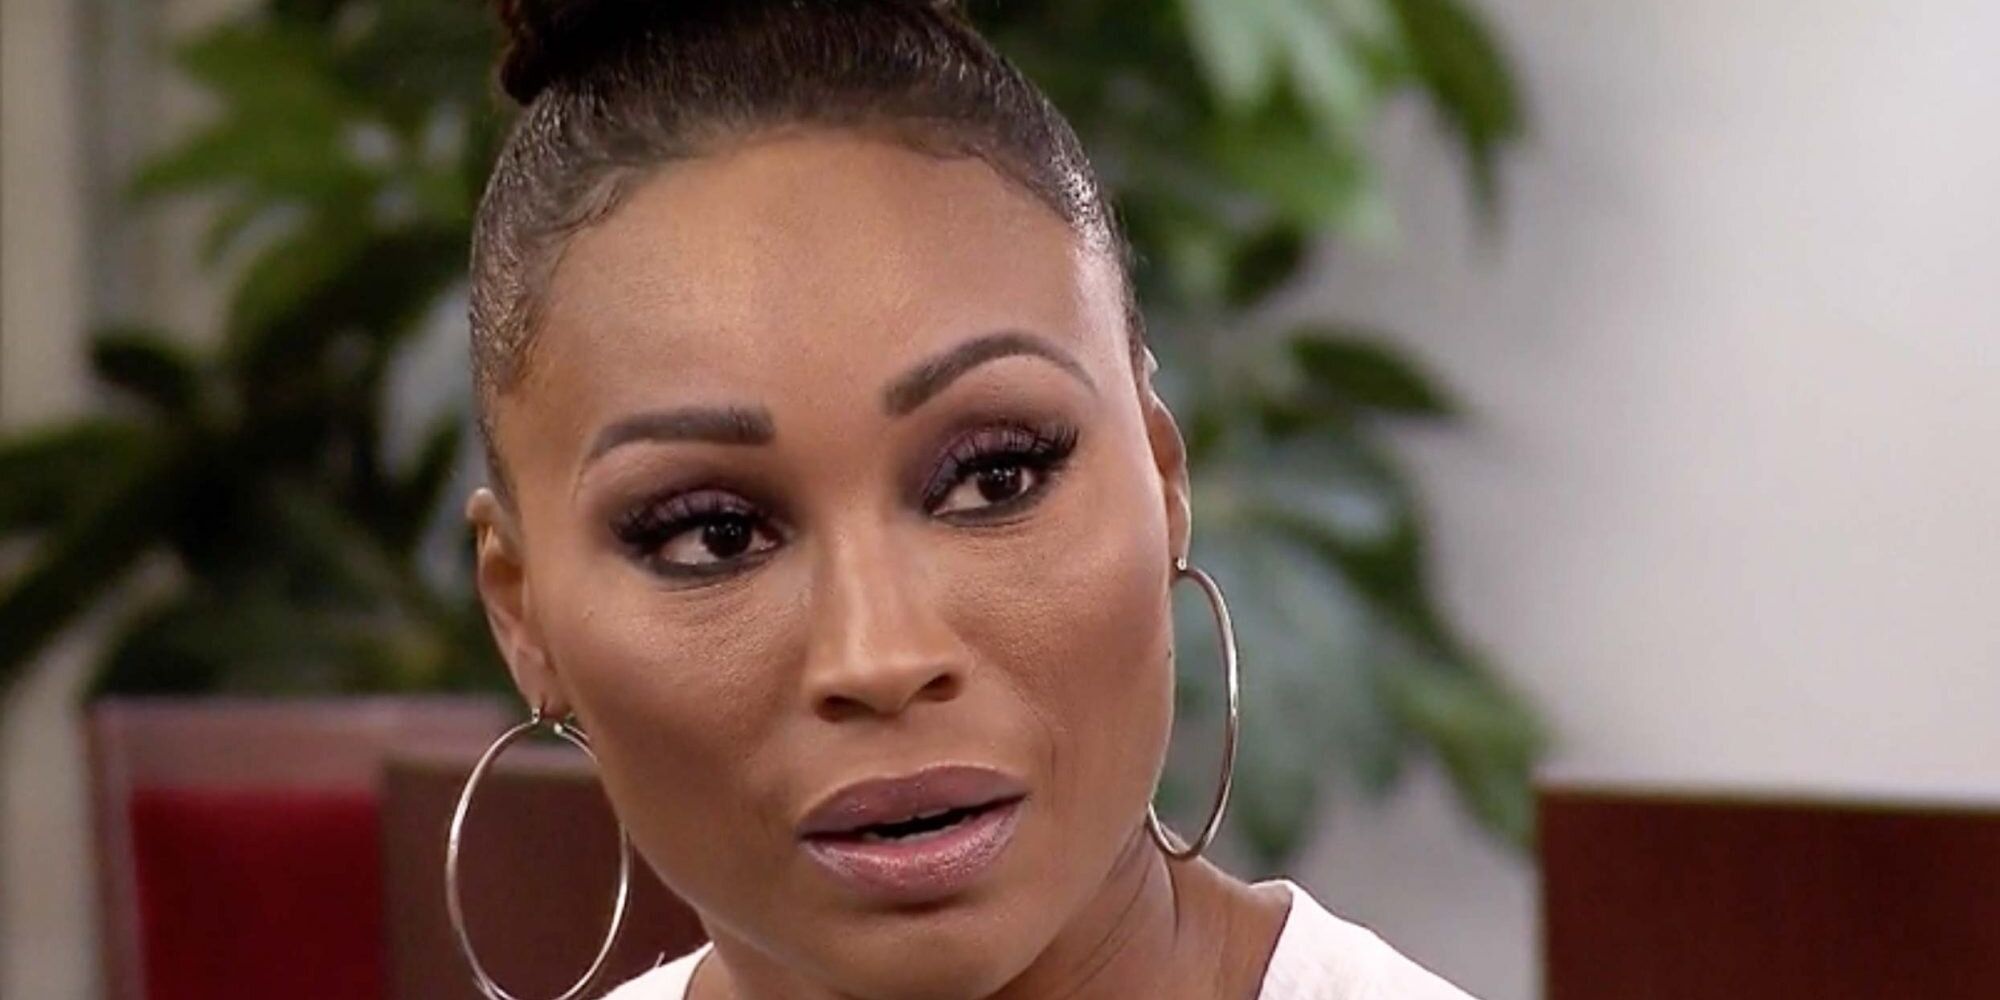 Kandi denies being aware that Cynthia wasn't invited to the grand opening in The Real Housewives Of Atlanta